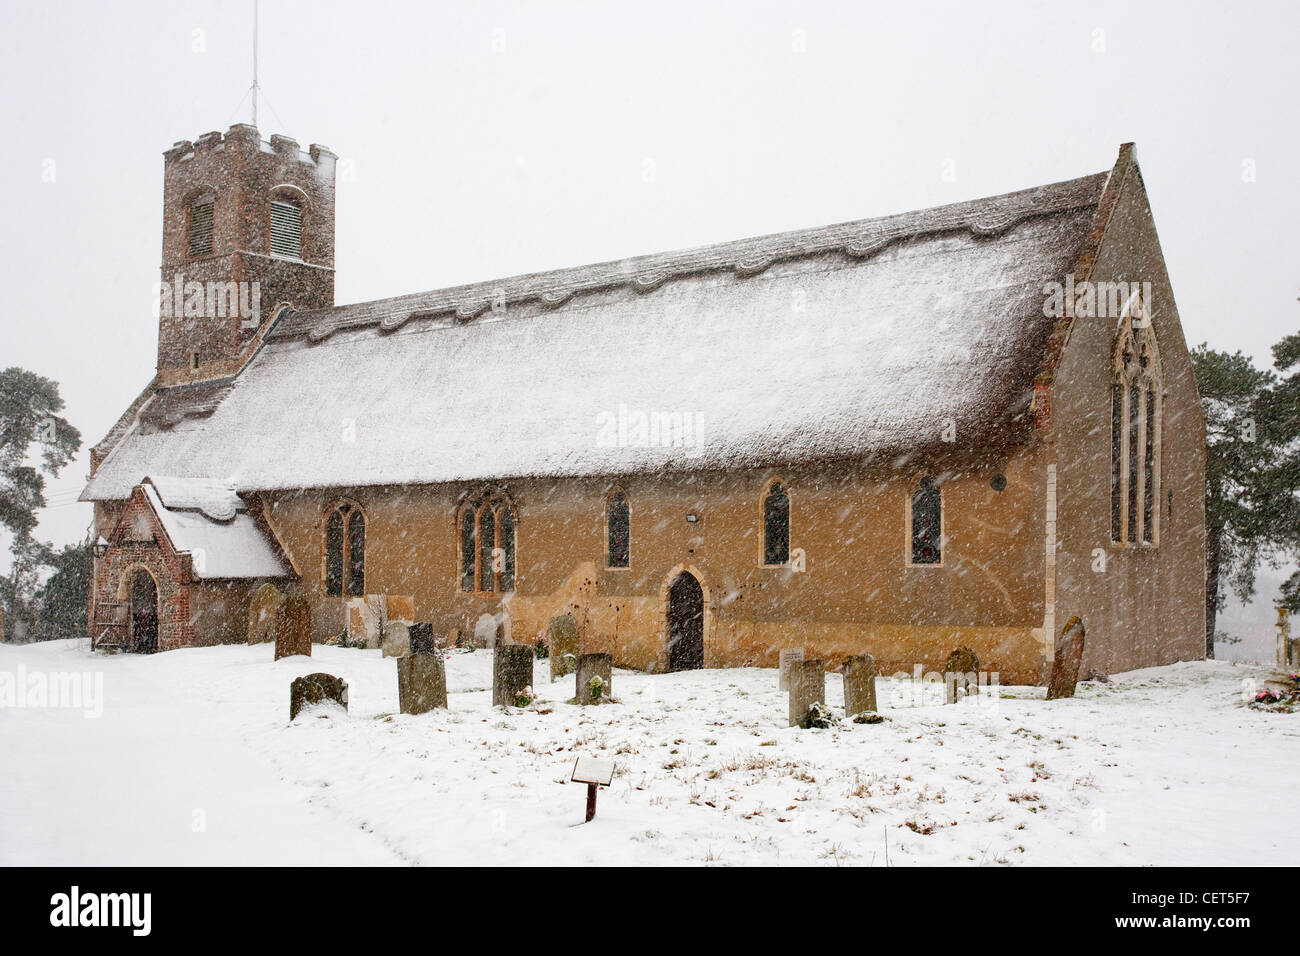 St Ethelbert Chiesa a Thurton in Norfolk durante nevicate invernali. Foto Stock